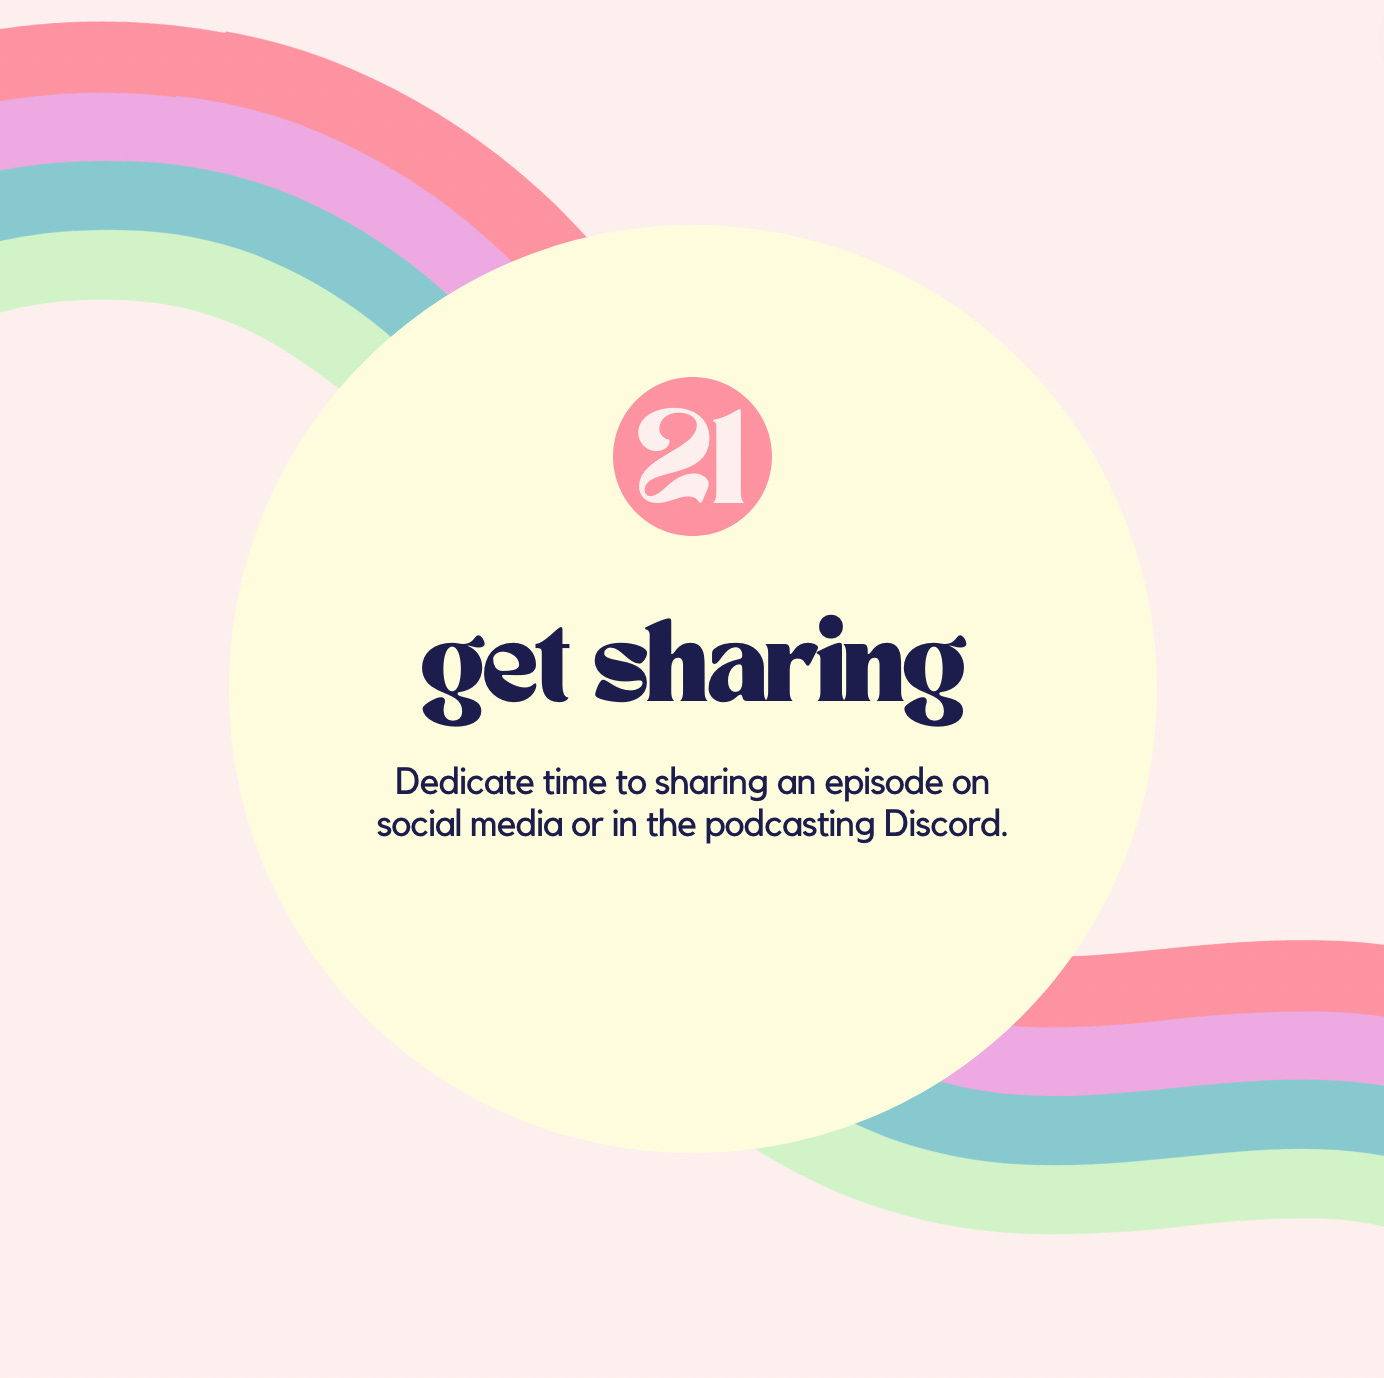 #21. Get Sharing. Dedicate time to sharing an episode on social media or in the podcasting Discord.